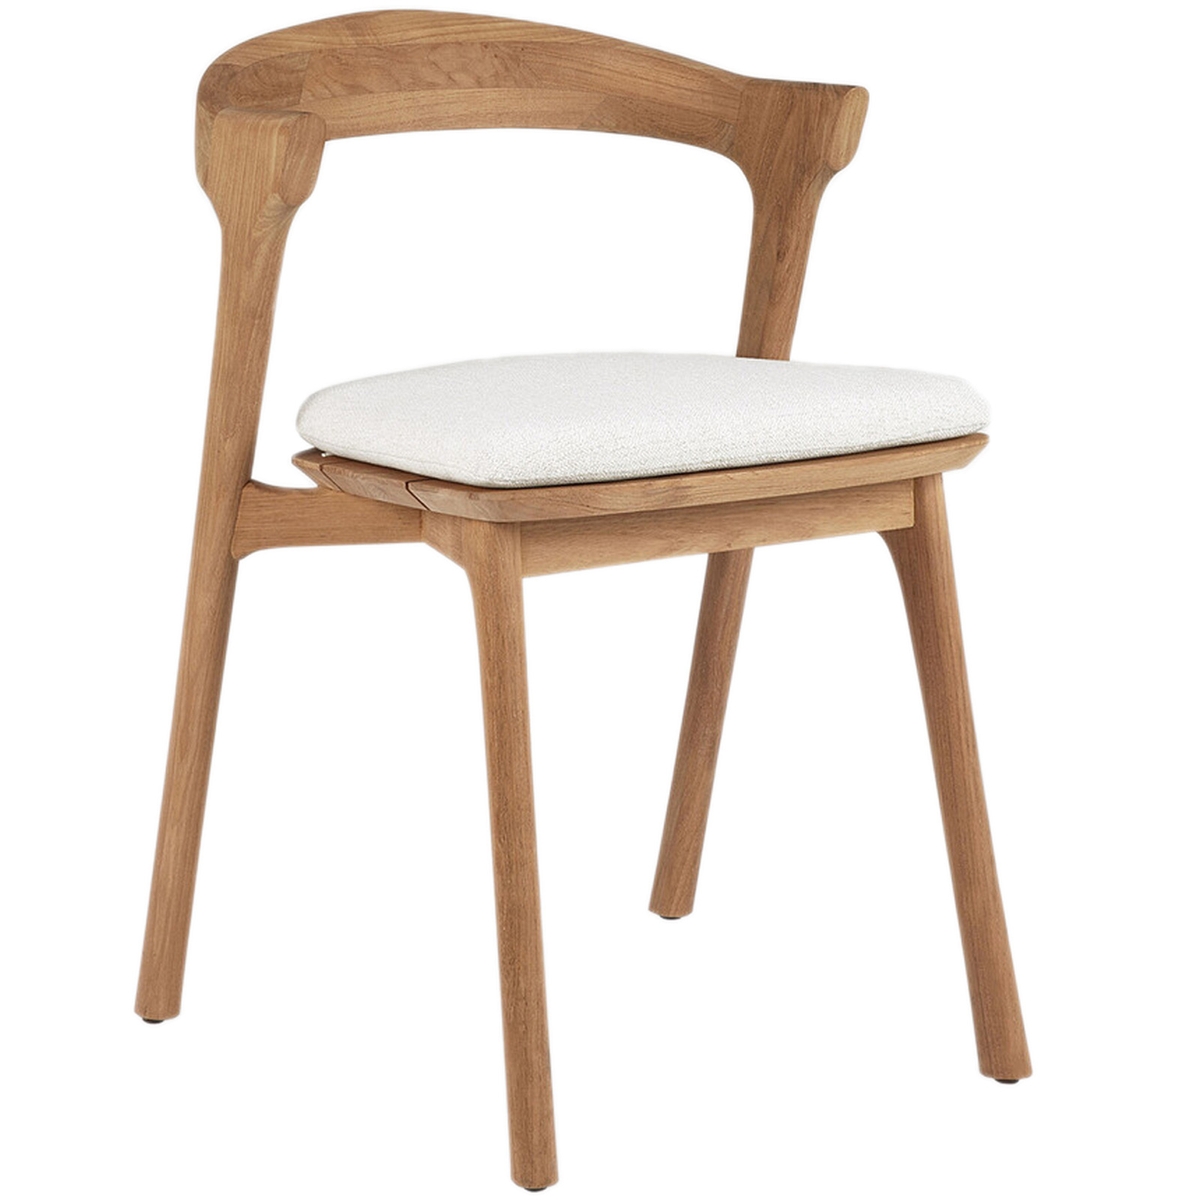 Bok Teak Outdoor Dining Chair With Cushion